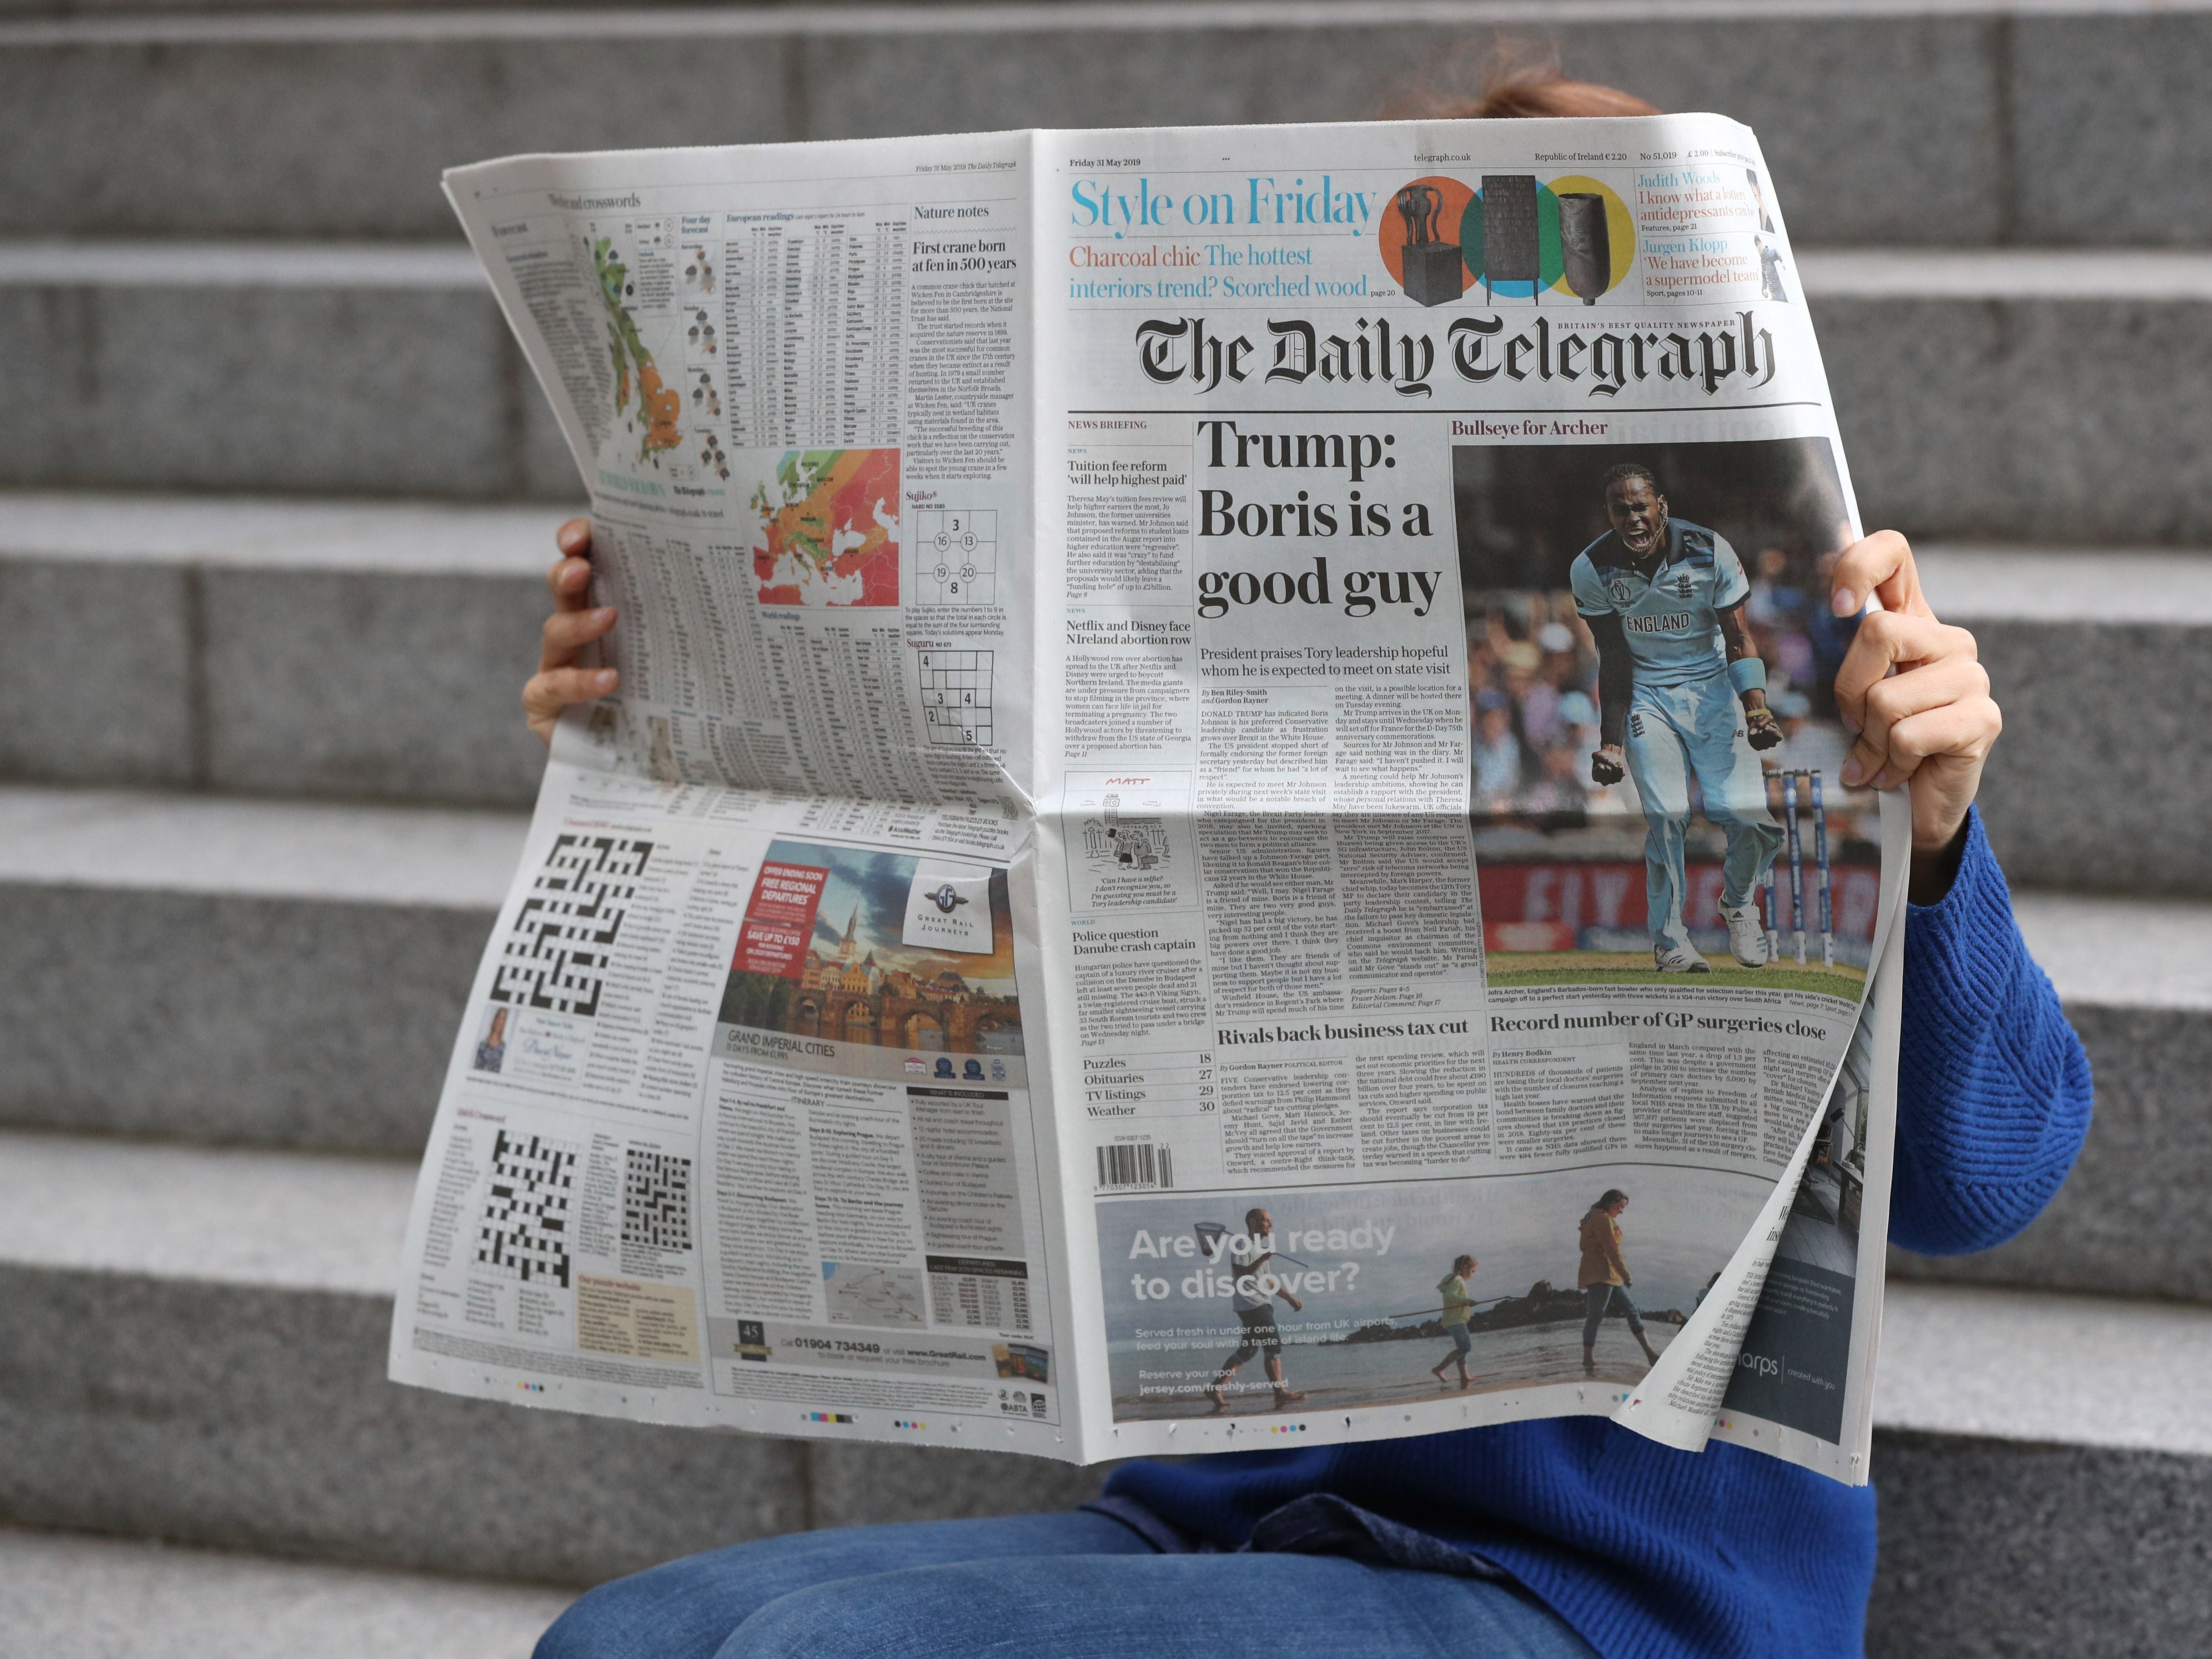 Private equity firm plots takeover bid for Telegraph – reports